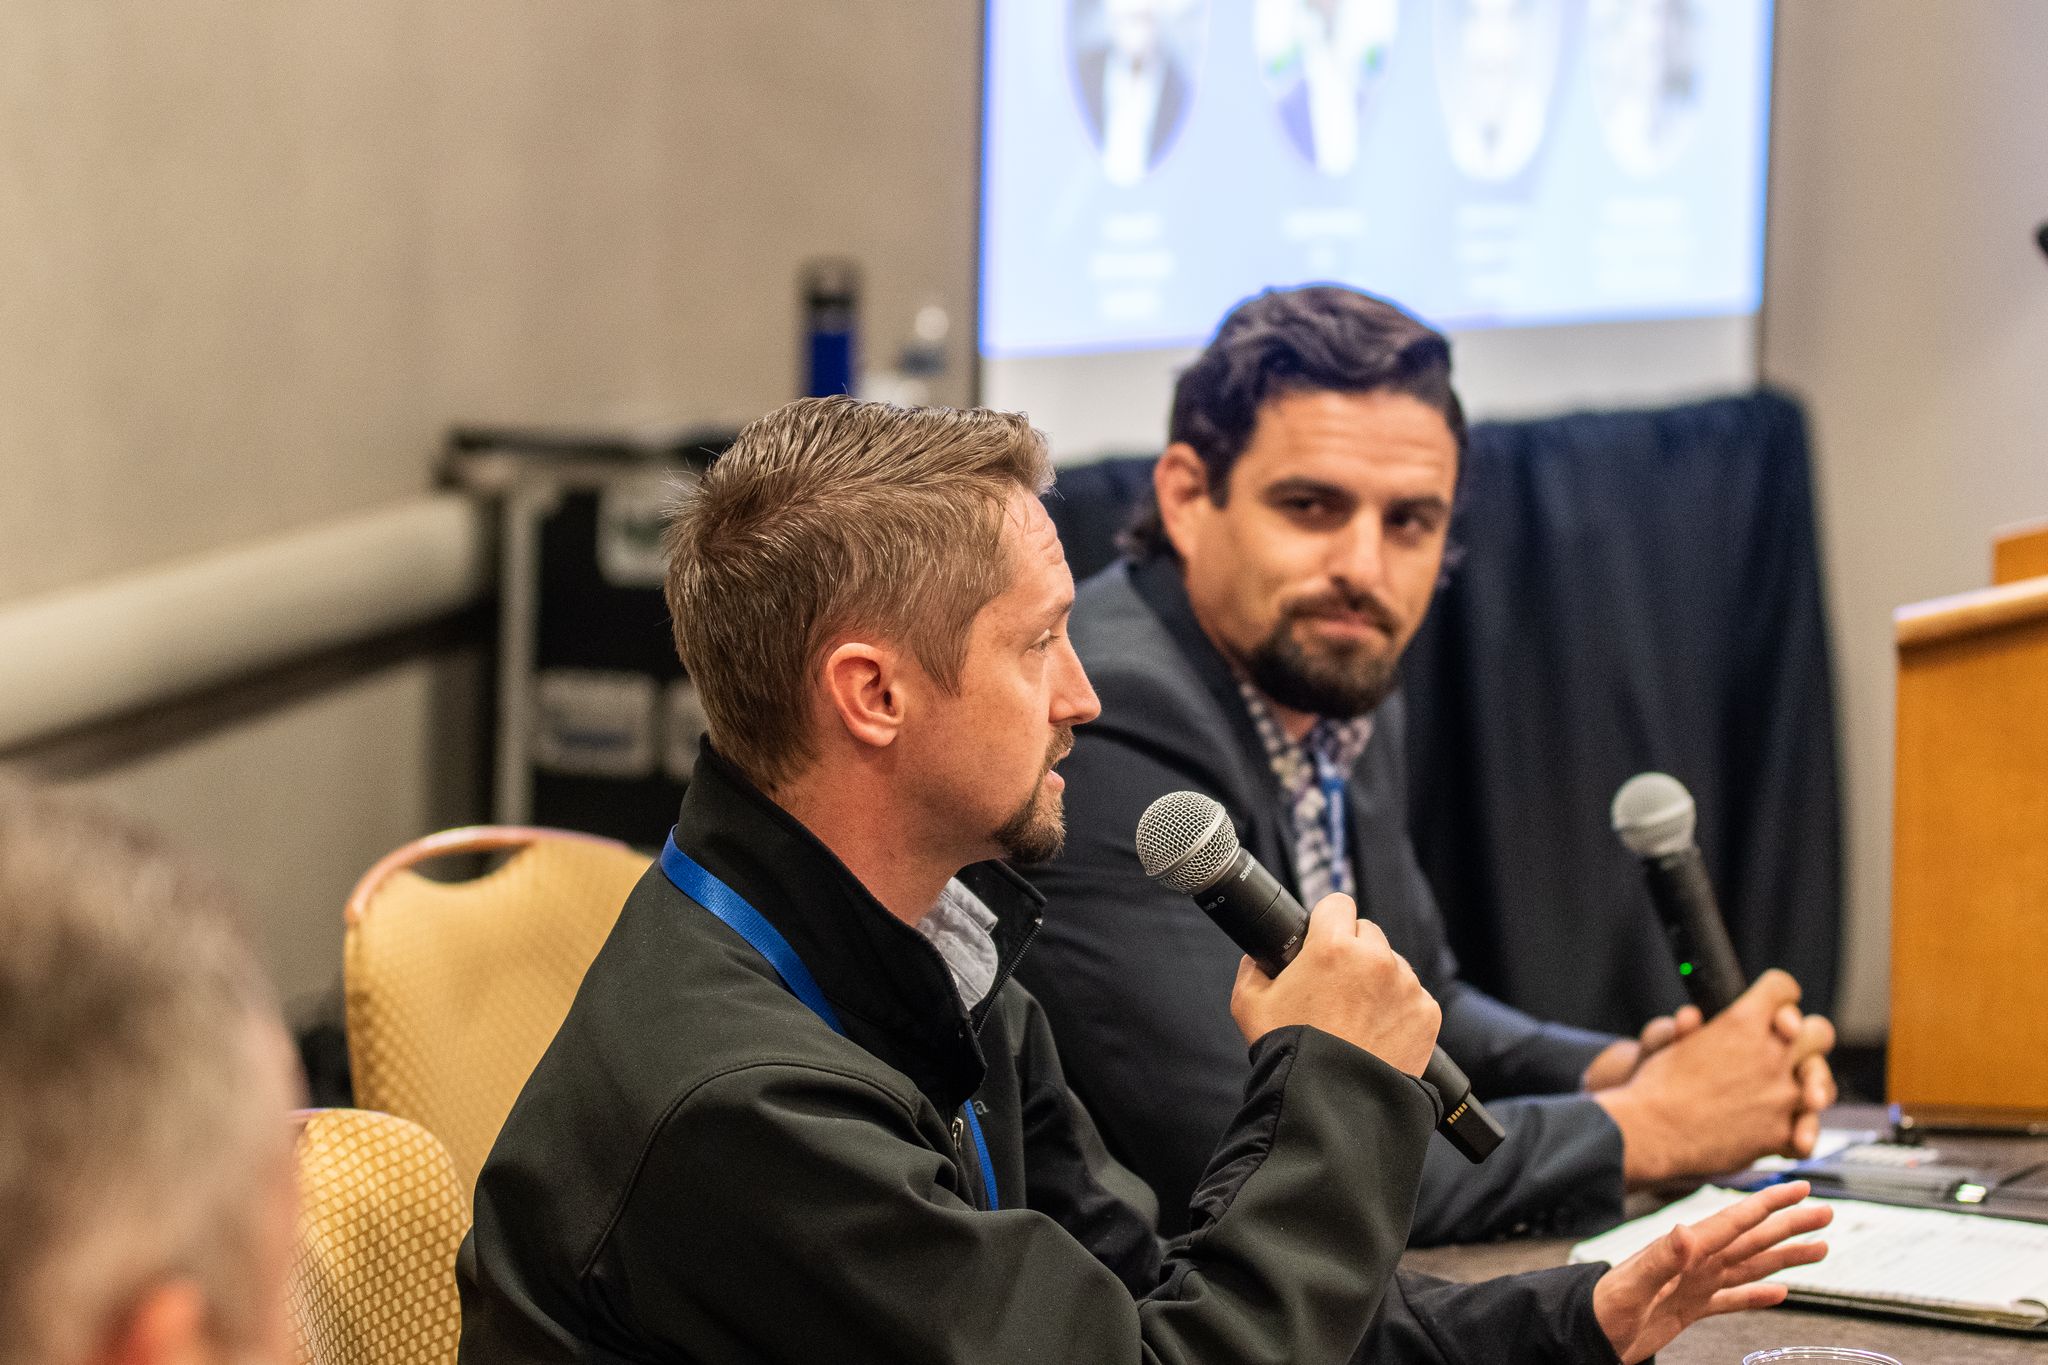 Nathan Houghton of PeakMed Direct Primary Care speaks during the track session titled "Direct Primary Care and Reference-Based Pricing: A Match Made in Heaven," as moderator Omar Arif of ClaimDOC looks on.